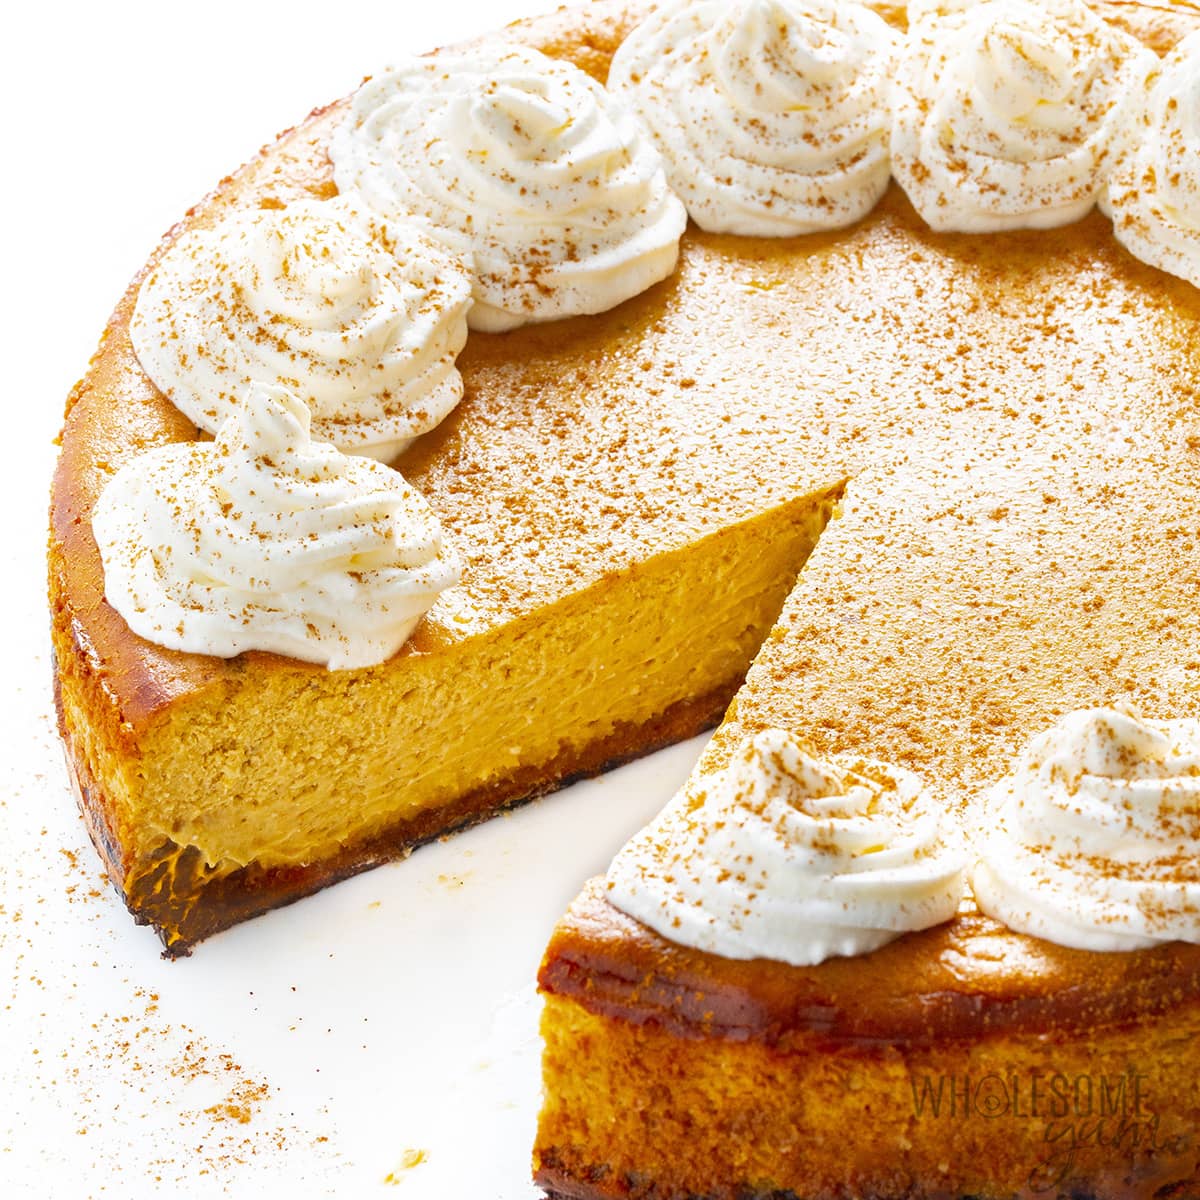 Whole low carb pumpkin cheesecake with slice removed.